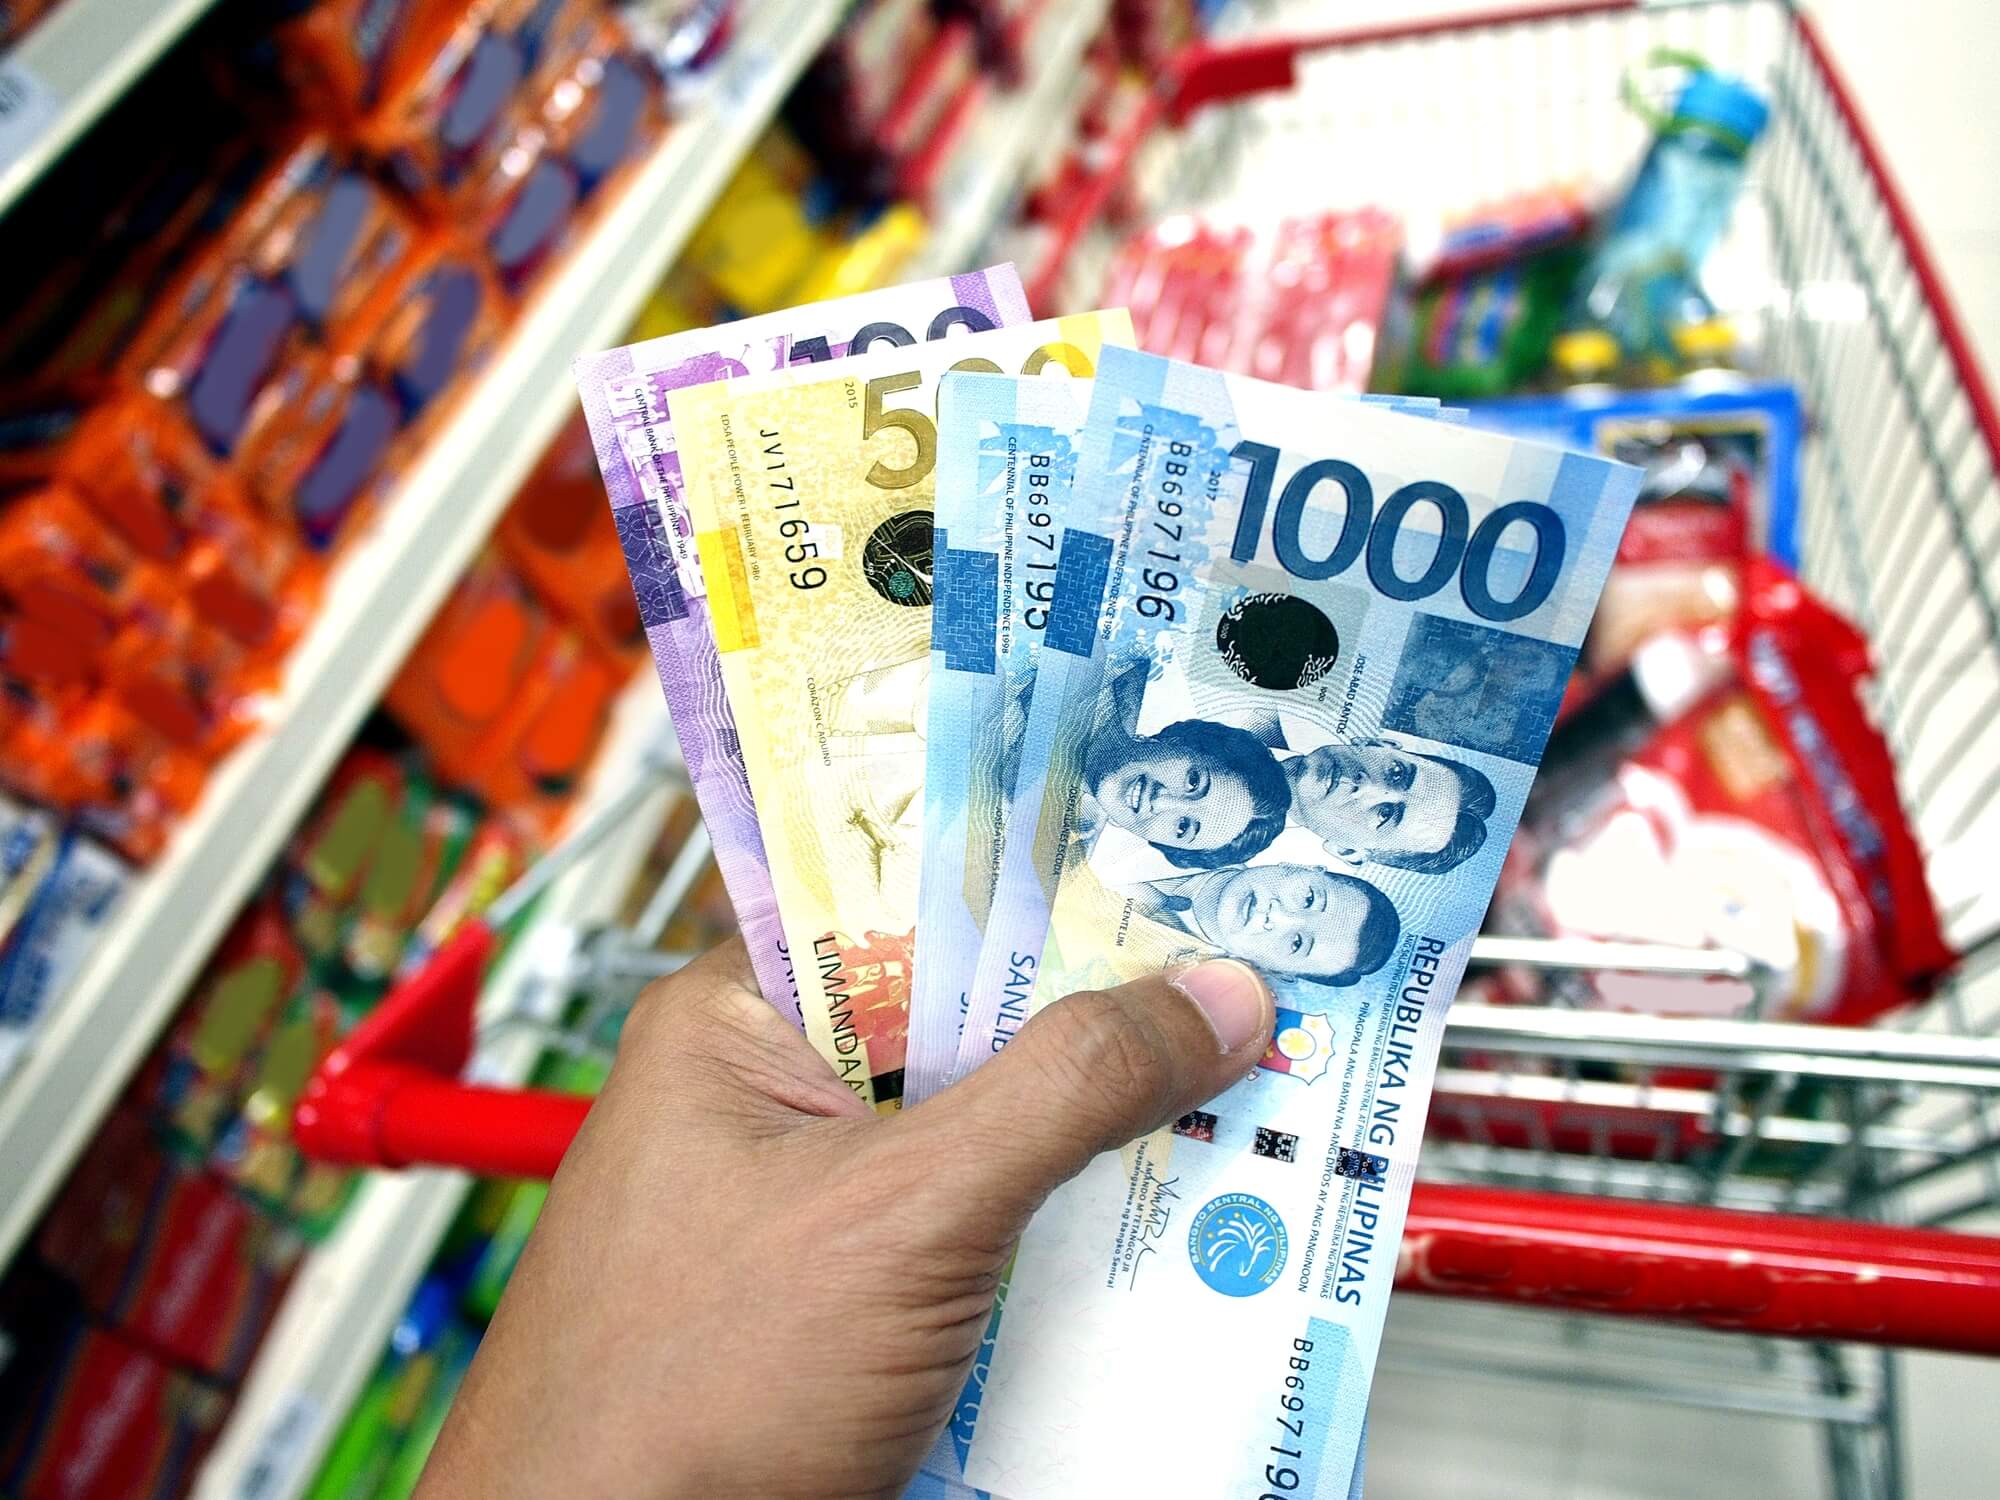 PH inflation is in check – BSP